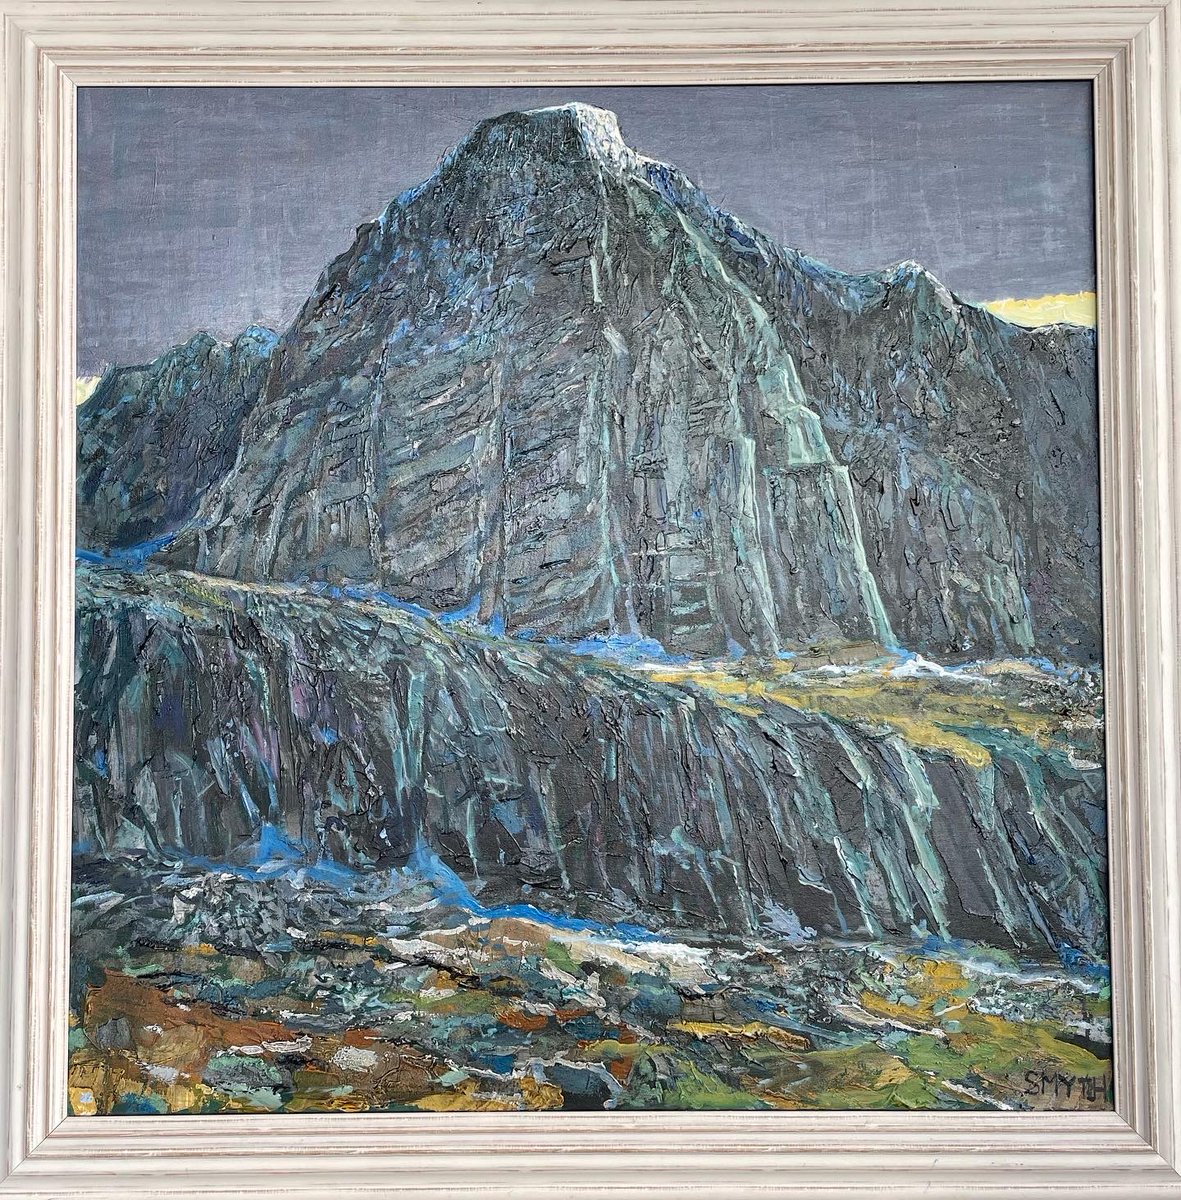 City Contemporary Art ccart.co.uk is hosting @DuaisEalain in conjunction with @NationalMod from this Friday 14th October, including Carn Dearg Buttress by Alistair Smyth from Lochaber.